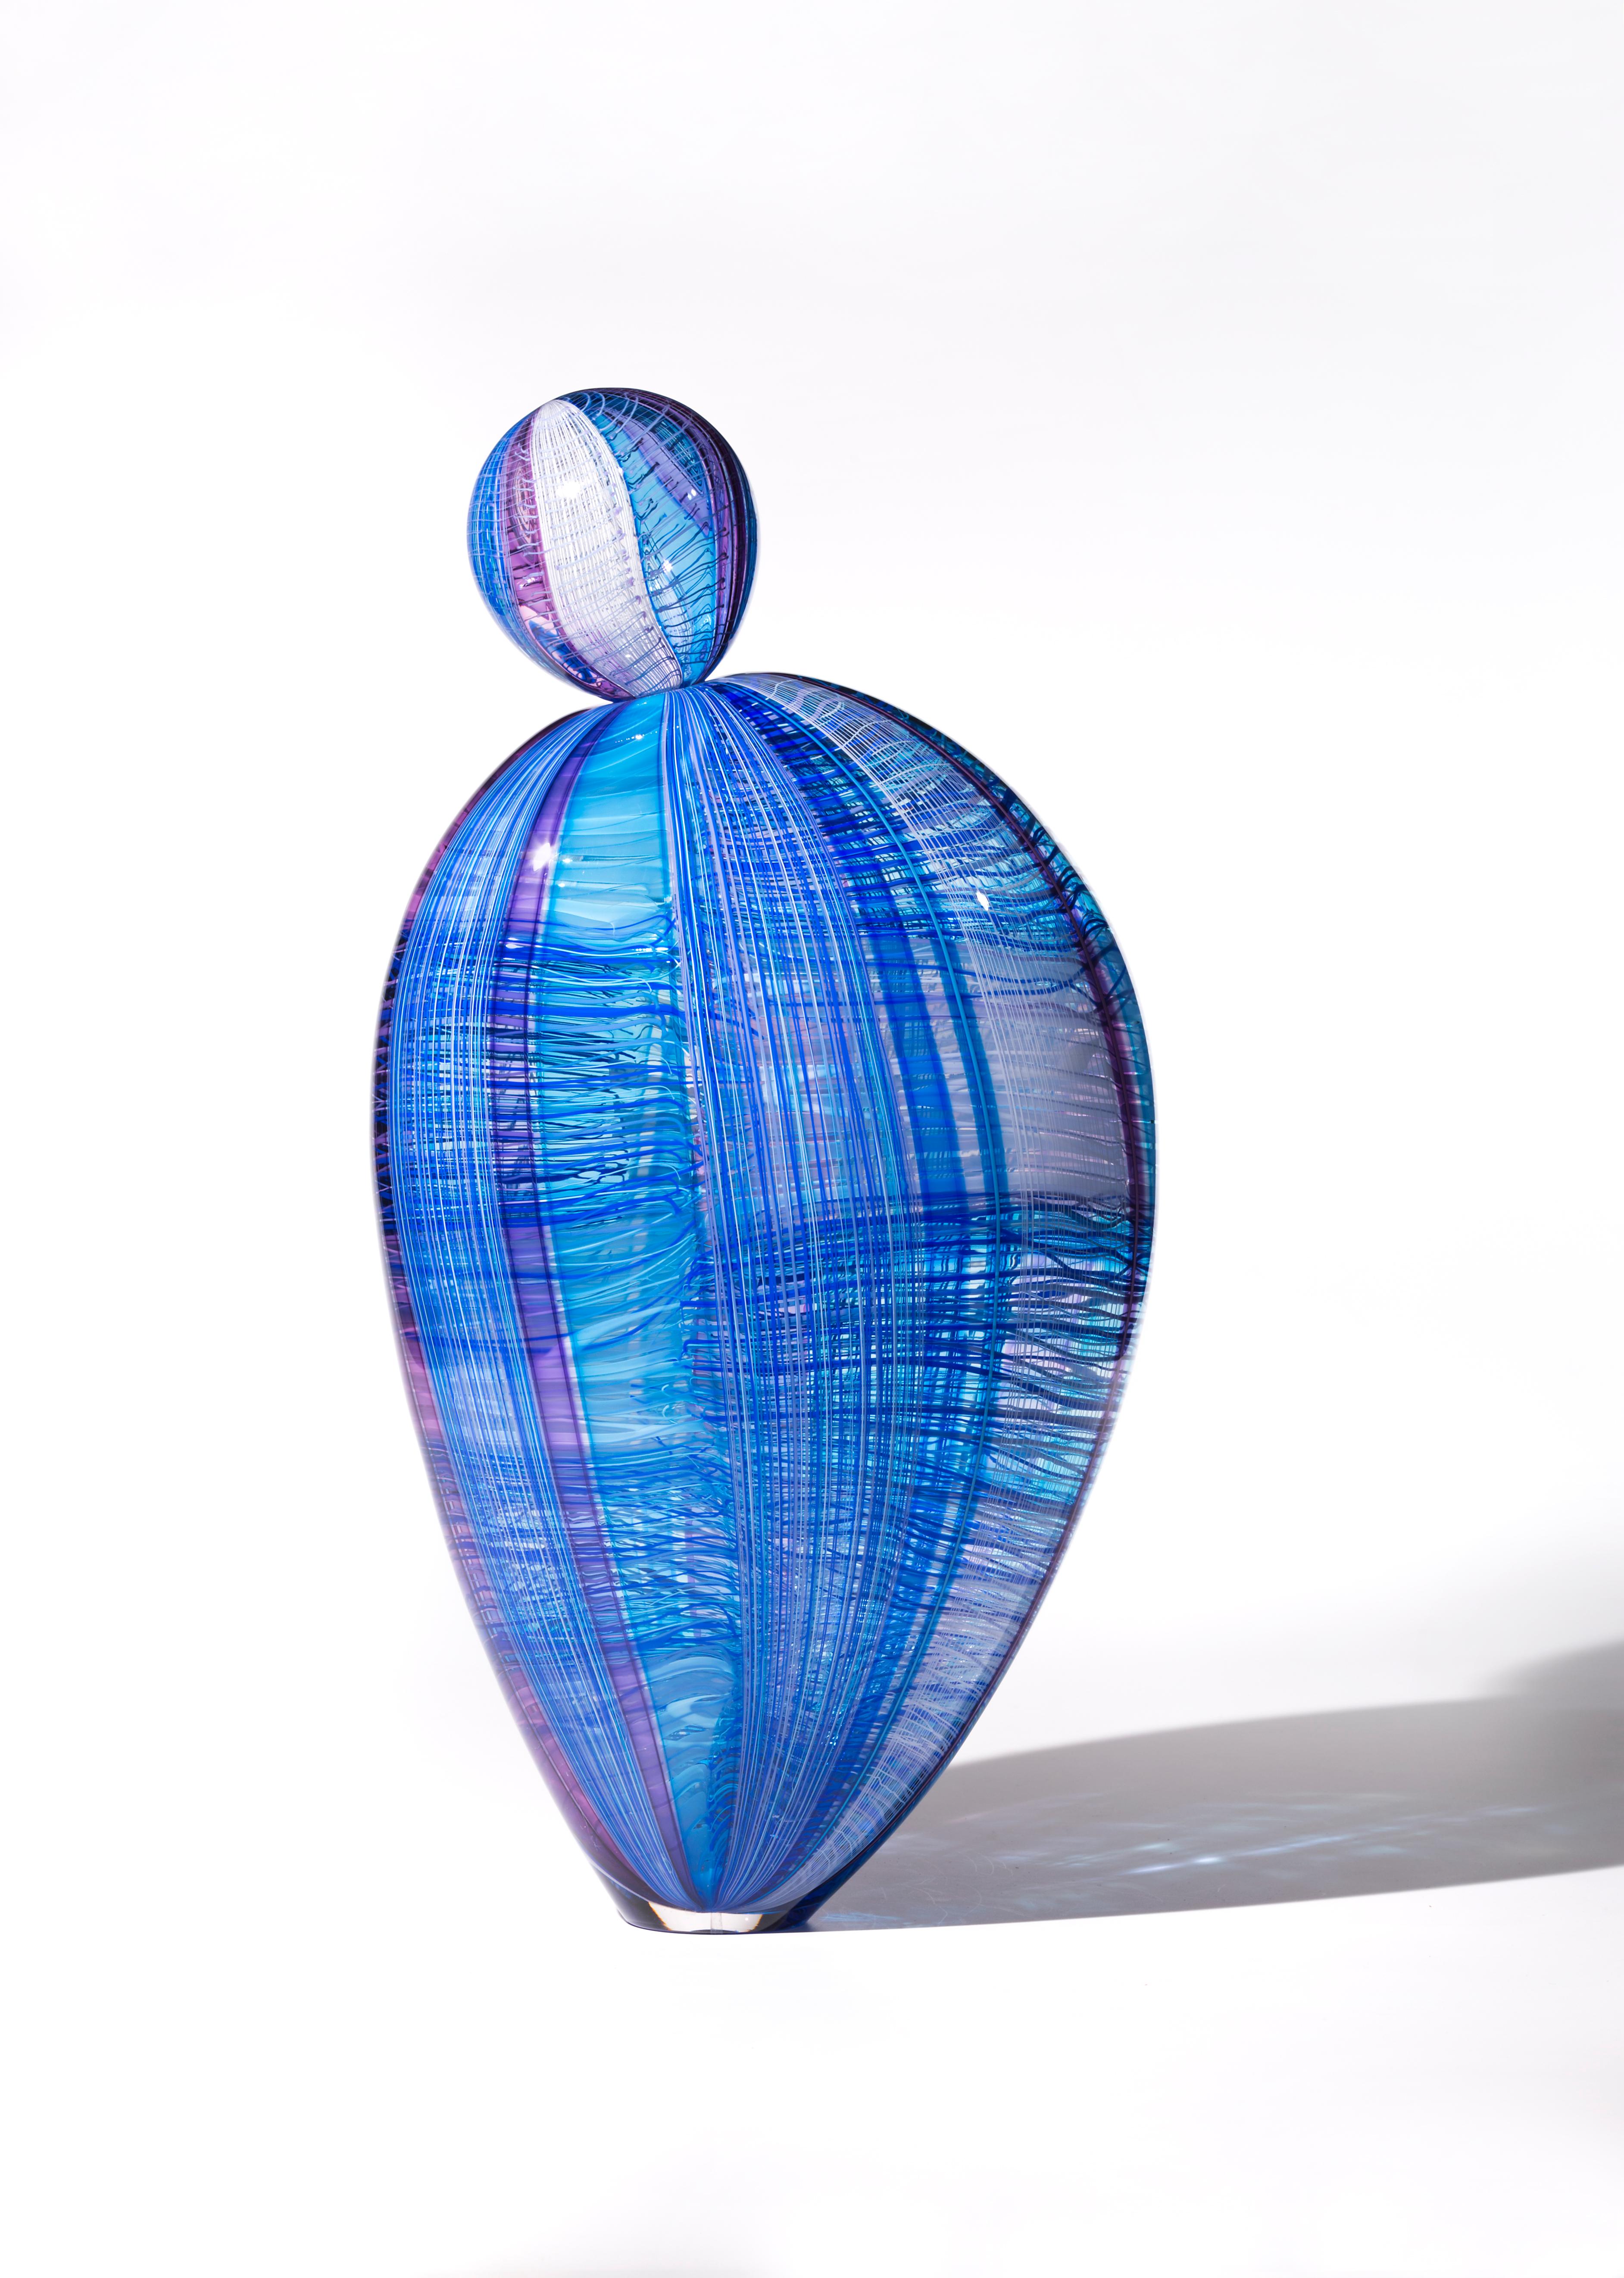 Nancy Callan Abstract Sculpture - "Natalia Paloma", Contemporary Blown Glass Sculpture, Brightly Colored Form